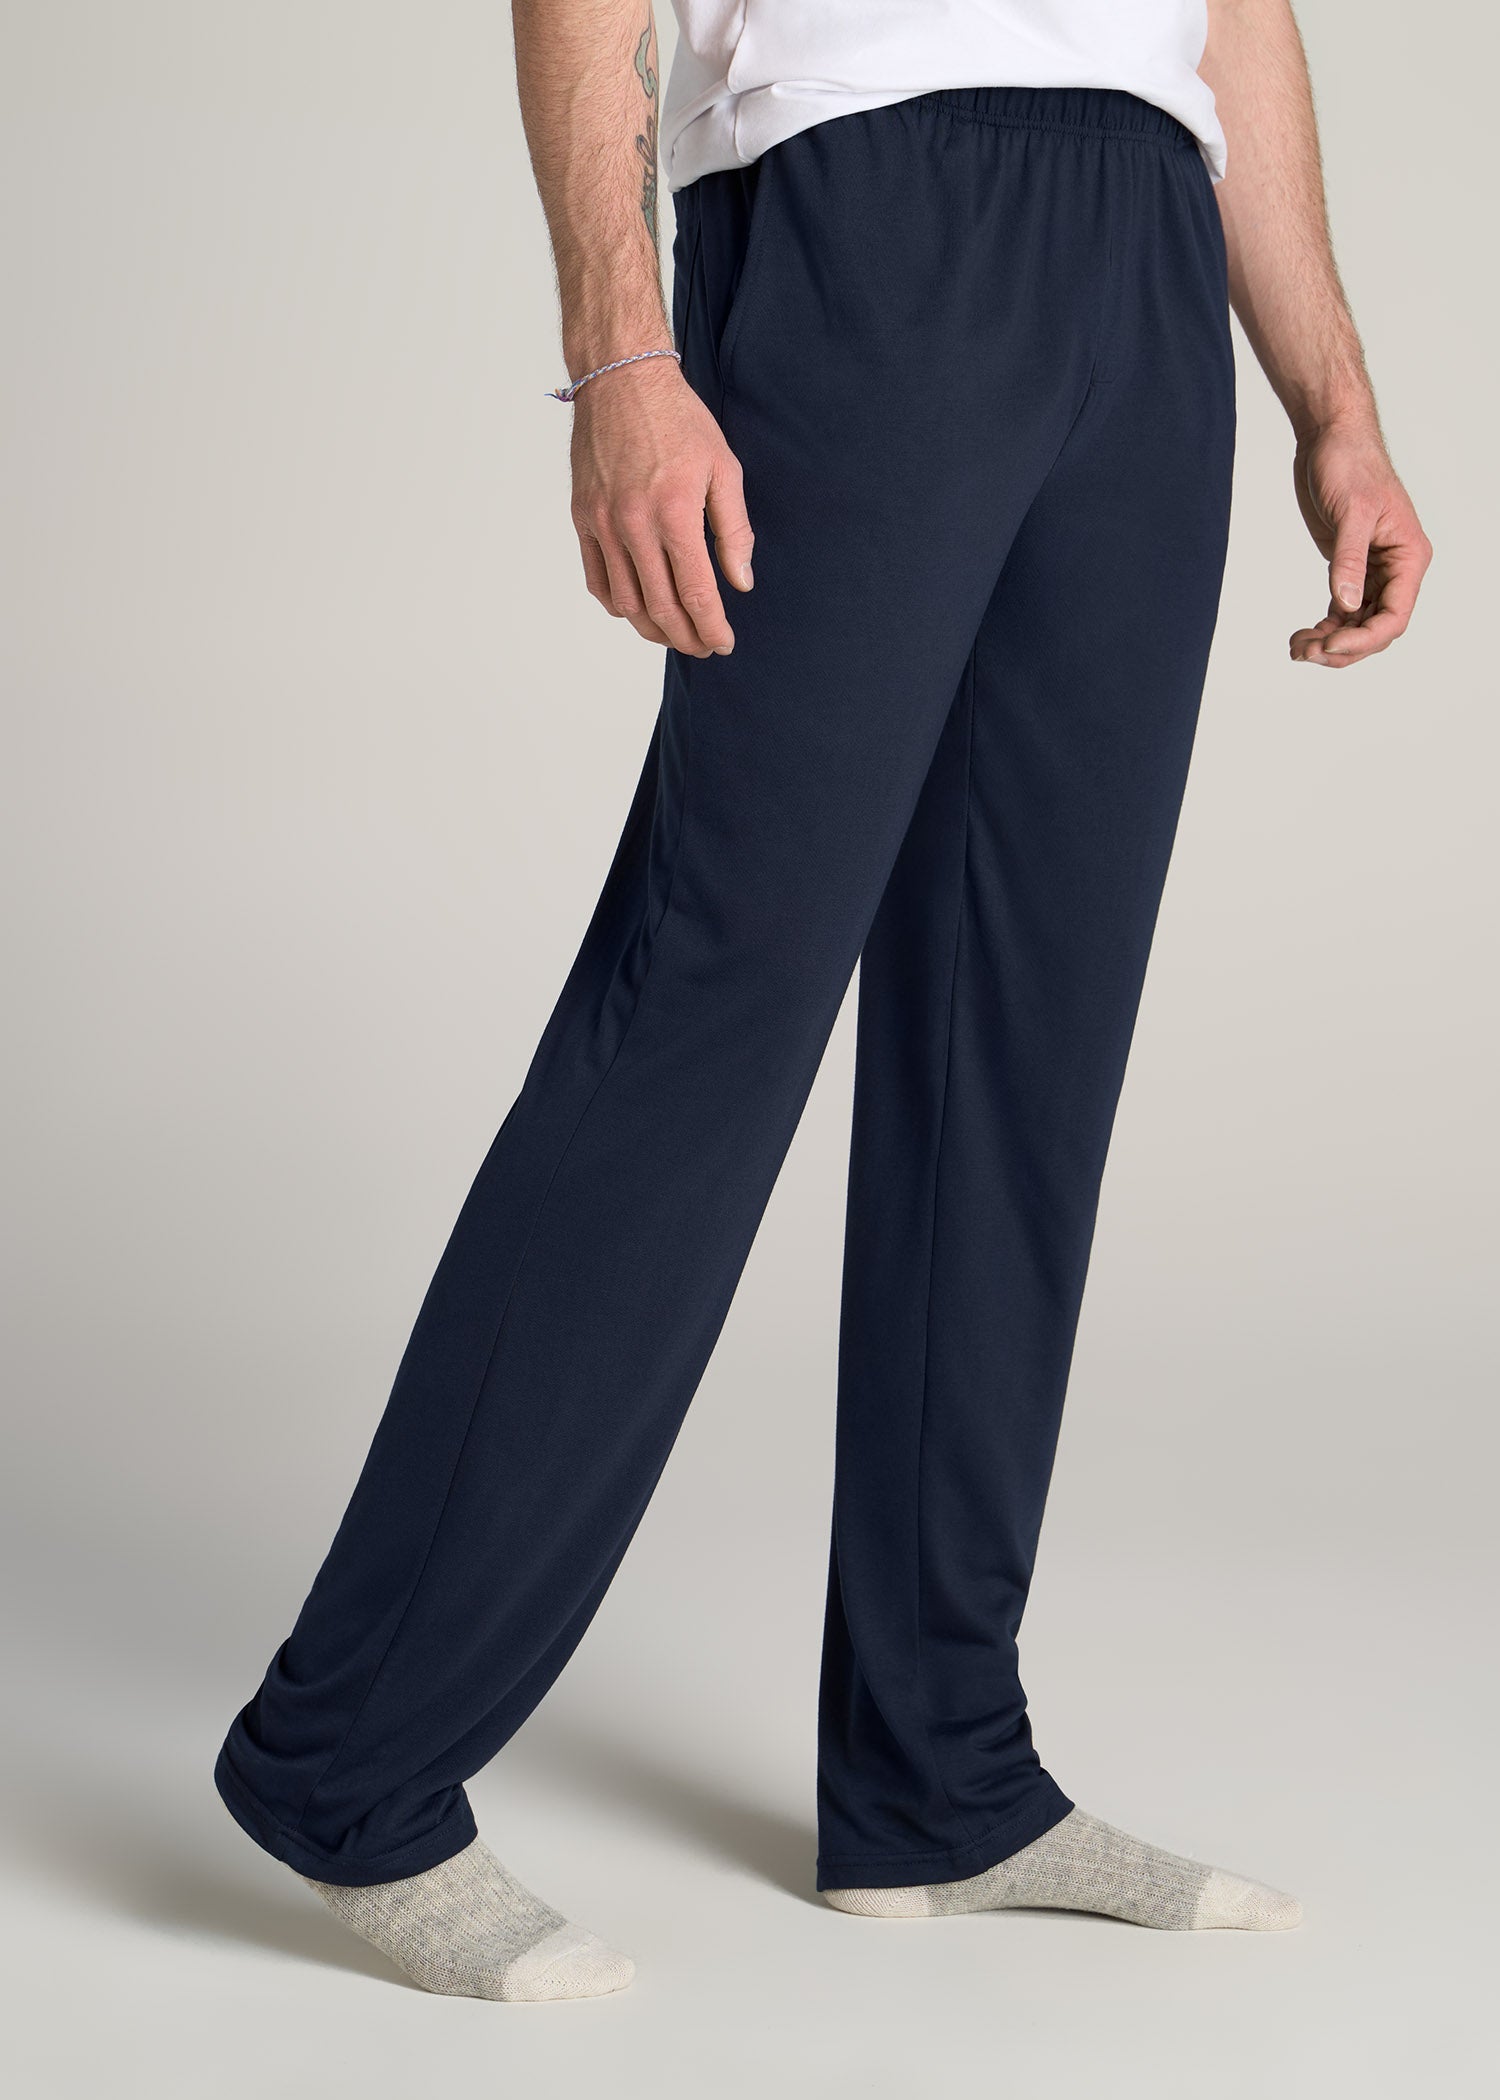 Lounge Pajama Pants for Tall Men in Navy